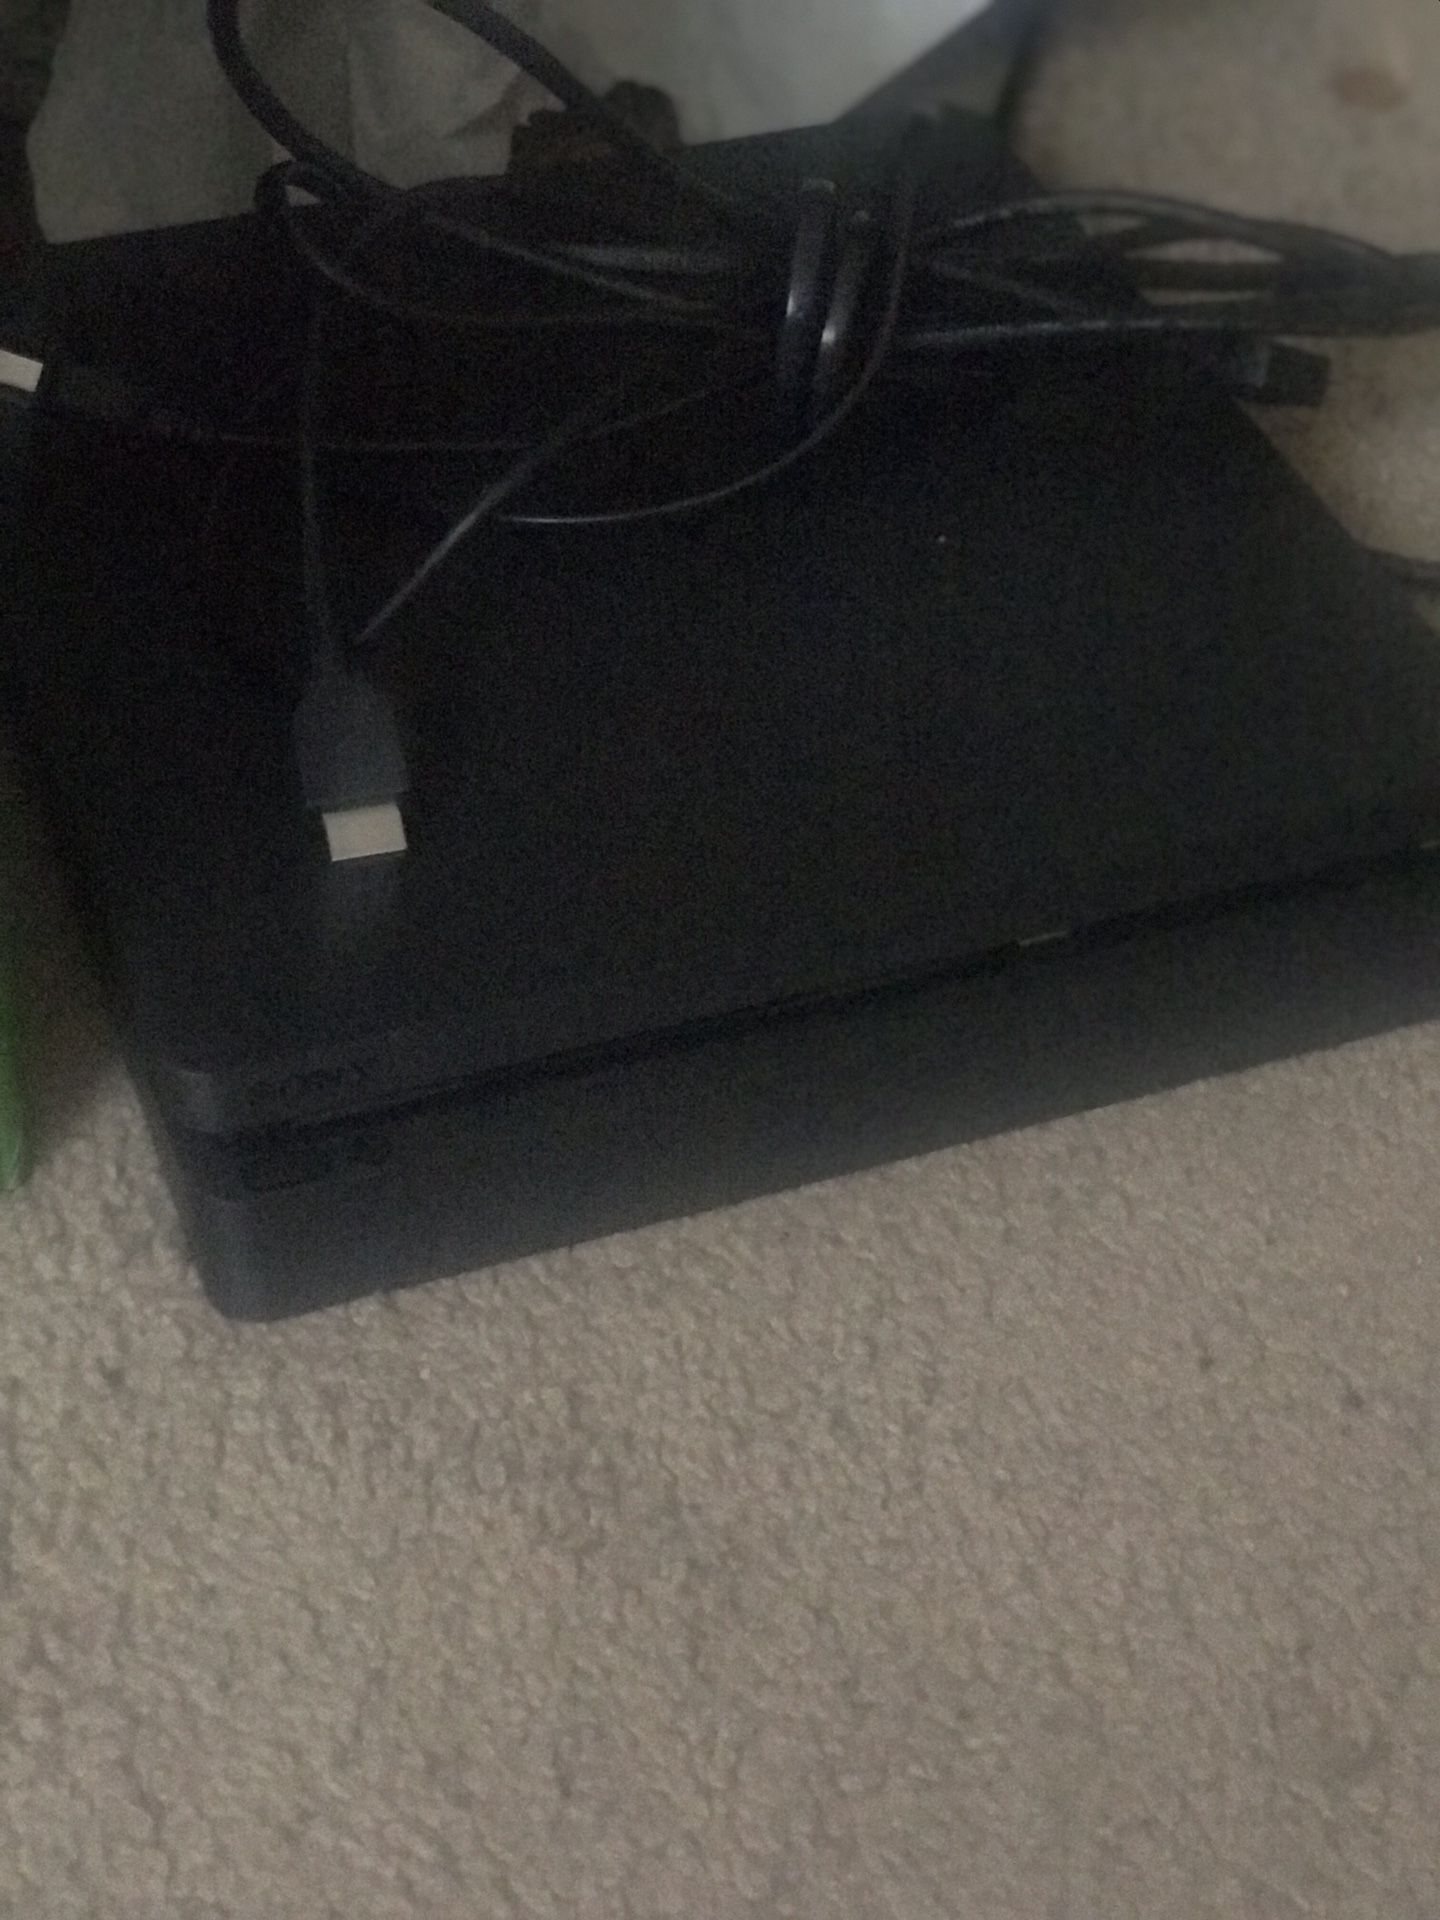 PS4 pro n Xbox one for sell